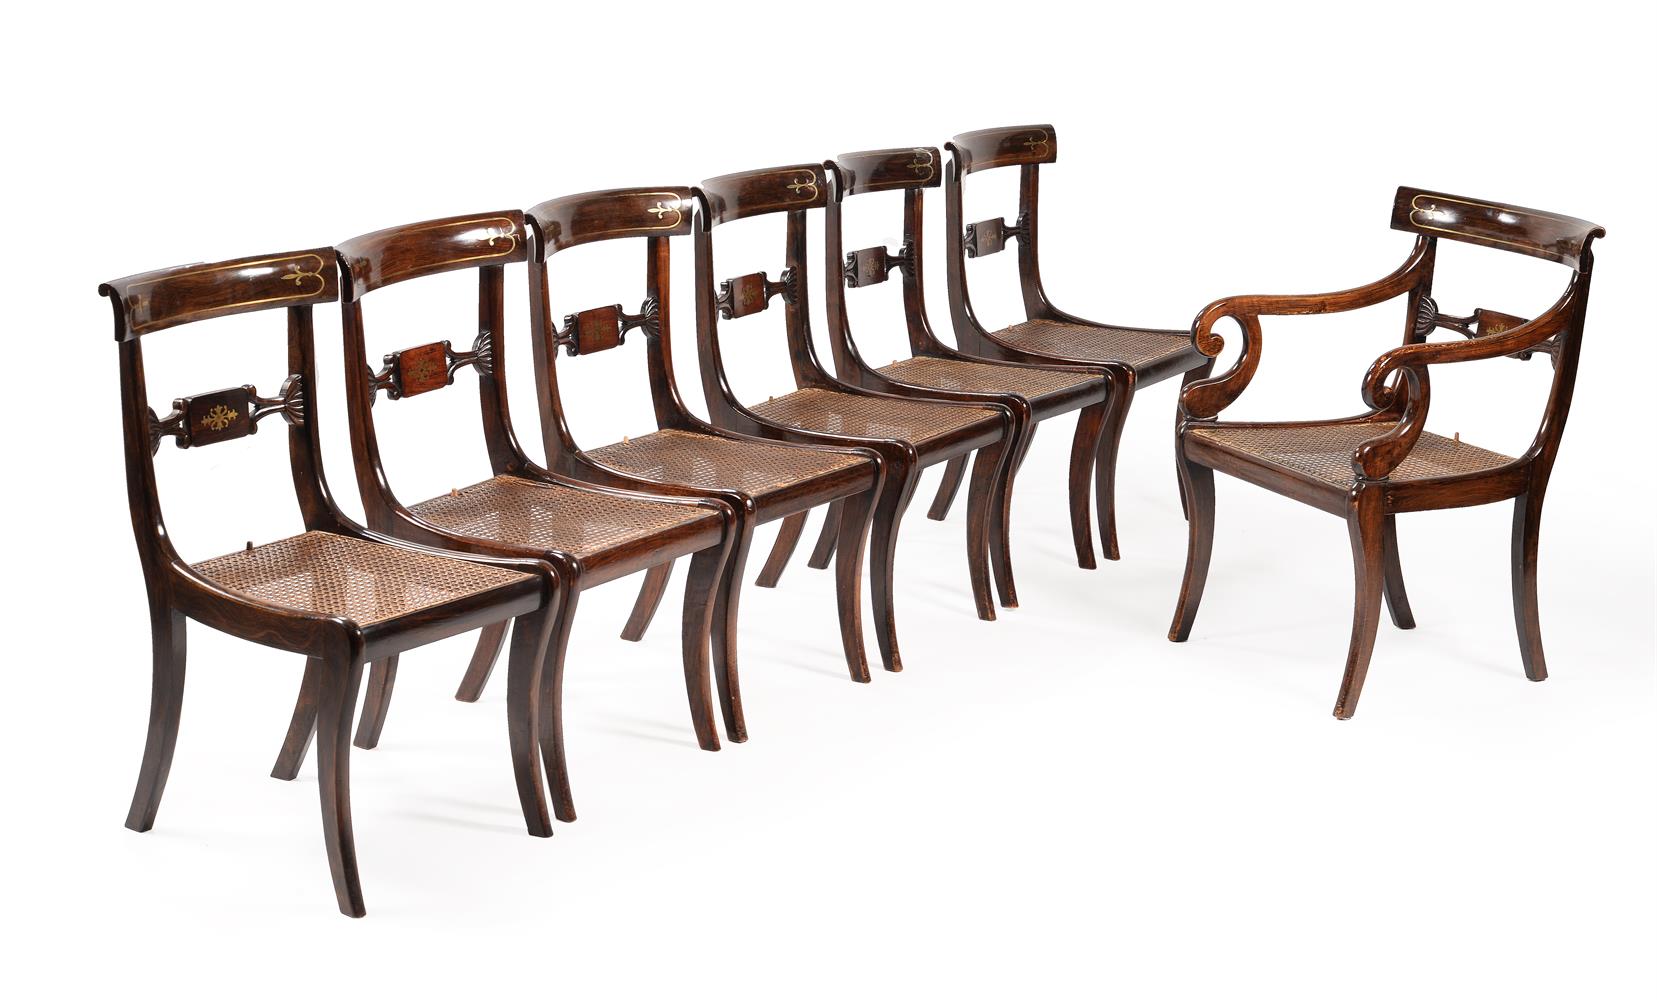 A SET OF FOURTEEN REGENCY SIMULATED ROSEWOOD AND BRASS INLAID DINING CHAIRS, CIRCA 1815 - Image 3 of 5